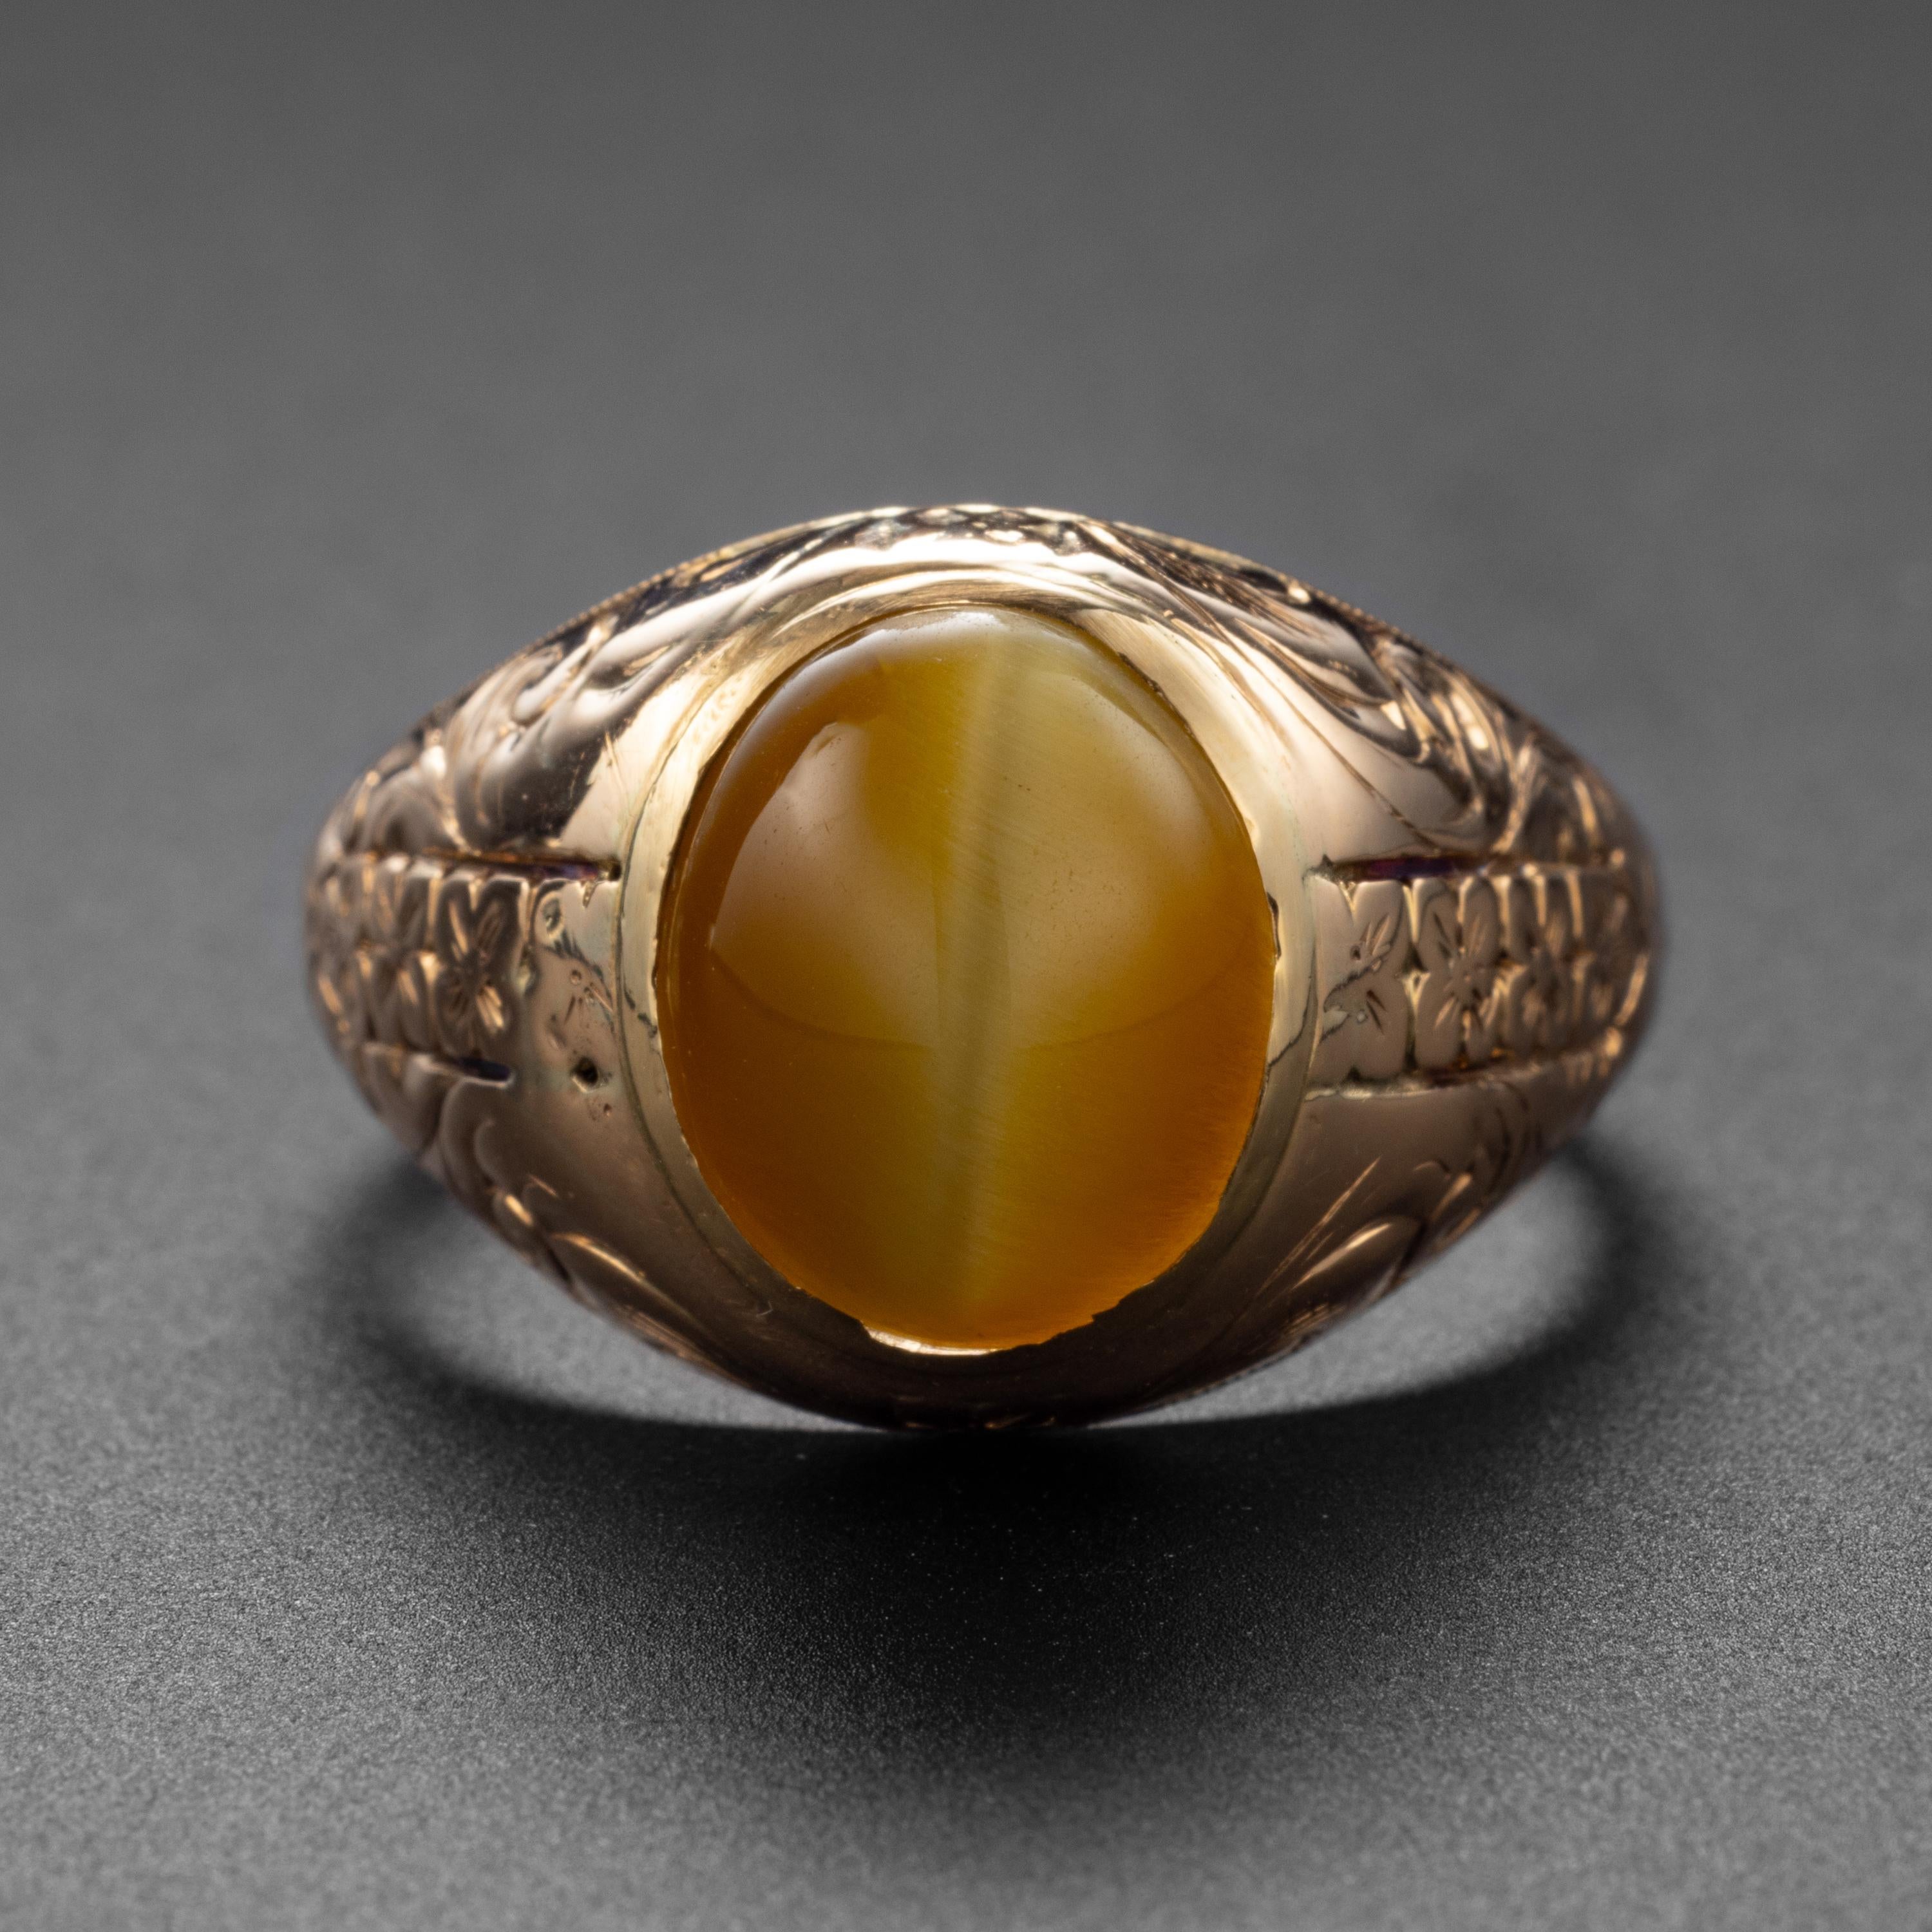 This Art Deco era (cica 1930s) 14K yellow gold hand-engraved ring was created by the venerable American jewelry manufacturer, Allsopp Bros. It features what is probably the finest tiger's eye cabochon I have ever encountered. 

Tiger's eye is